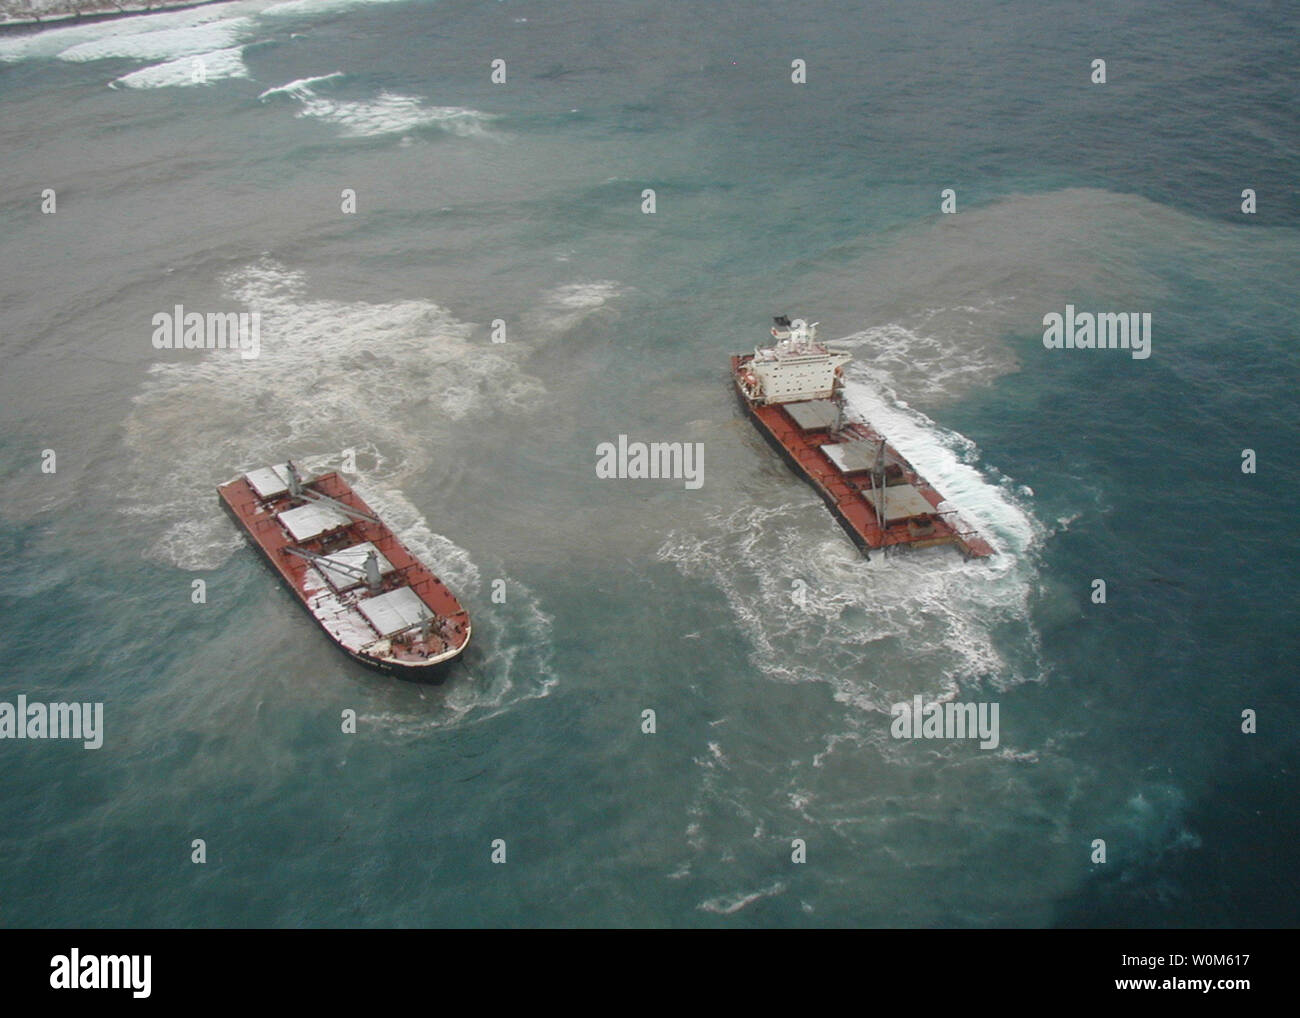 An aerial view on Dec. 9, 2004, of the Selendang Ayu during an Incident Command System overflight to search for possible spilled oil shows where the 738-foot vessel broke in two. The Malaysian owned freighter ran aground and split in half on Unalaska Island in the Aleutian chain on Dec. 8 after its engines failed. A Coast Guard helicopter crashed after rescuing the crew. A second Coast Guard helicopter rescue crew safely recovered the wrecked helicopter's crew and one man from the freighter. Six Selendang Auy crewmen remain missing.  (UPI Photo/Alaska Department of Fish and Game) Stock Photo